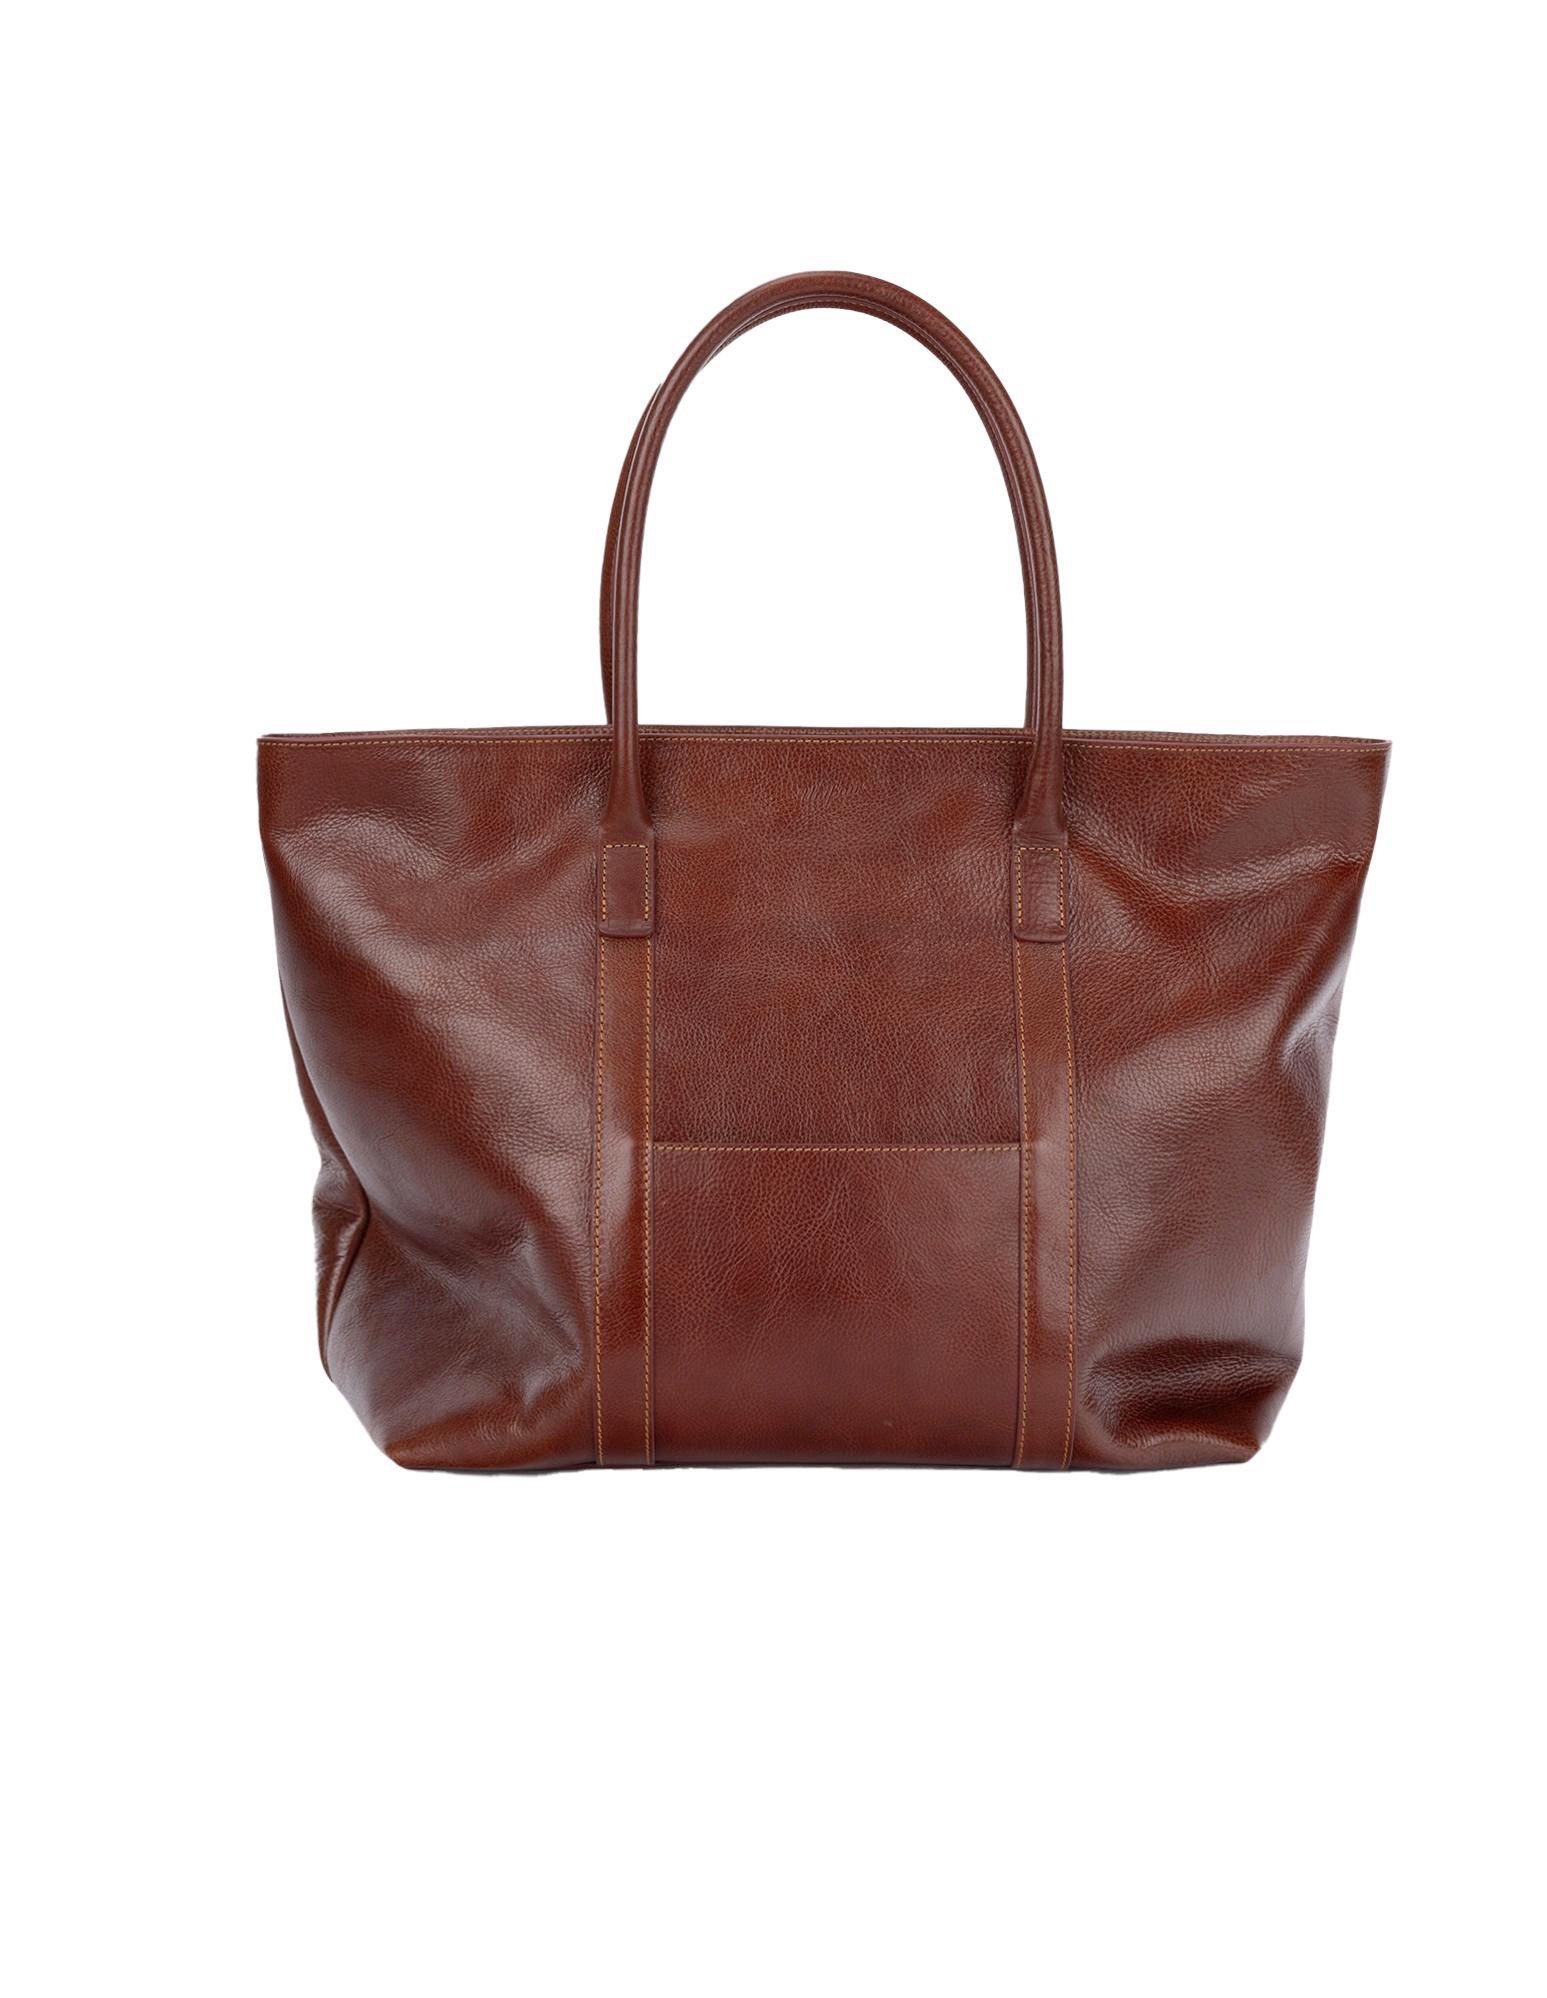 Essential Leather Tote Bag (Tan)